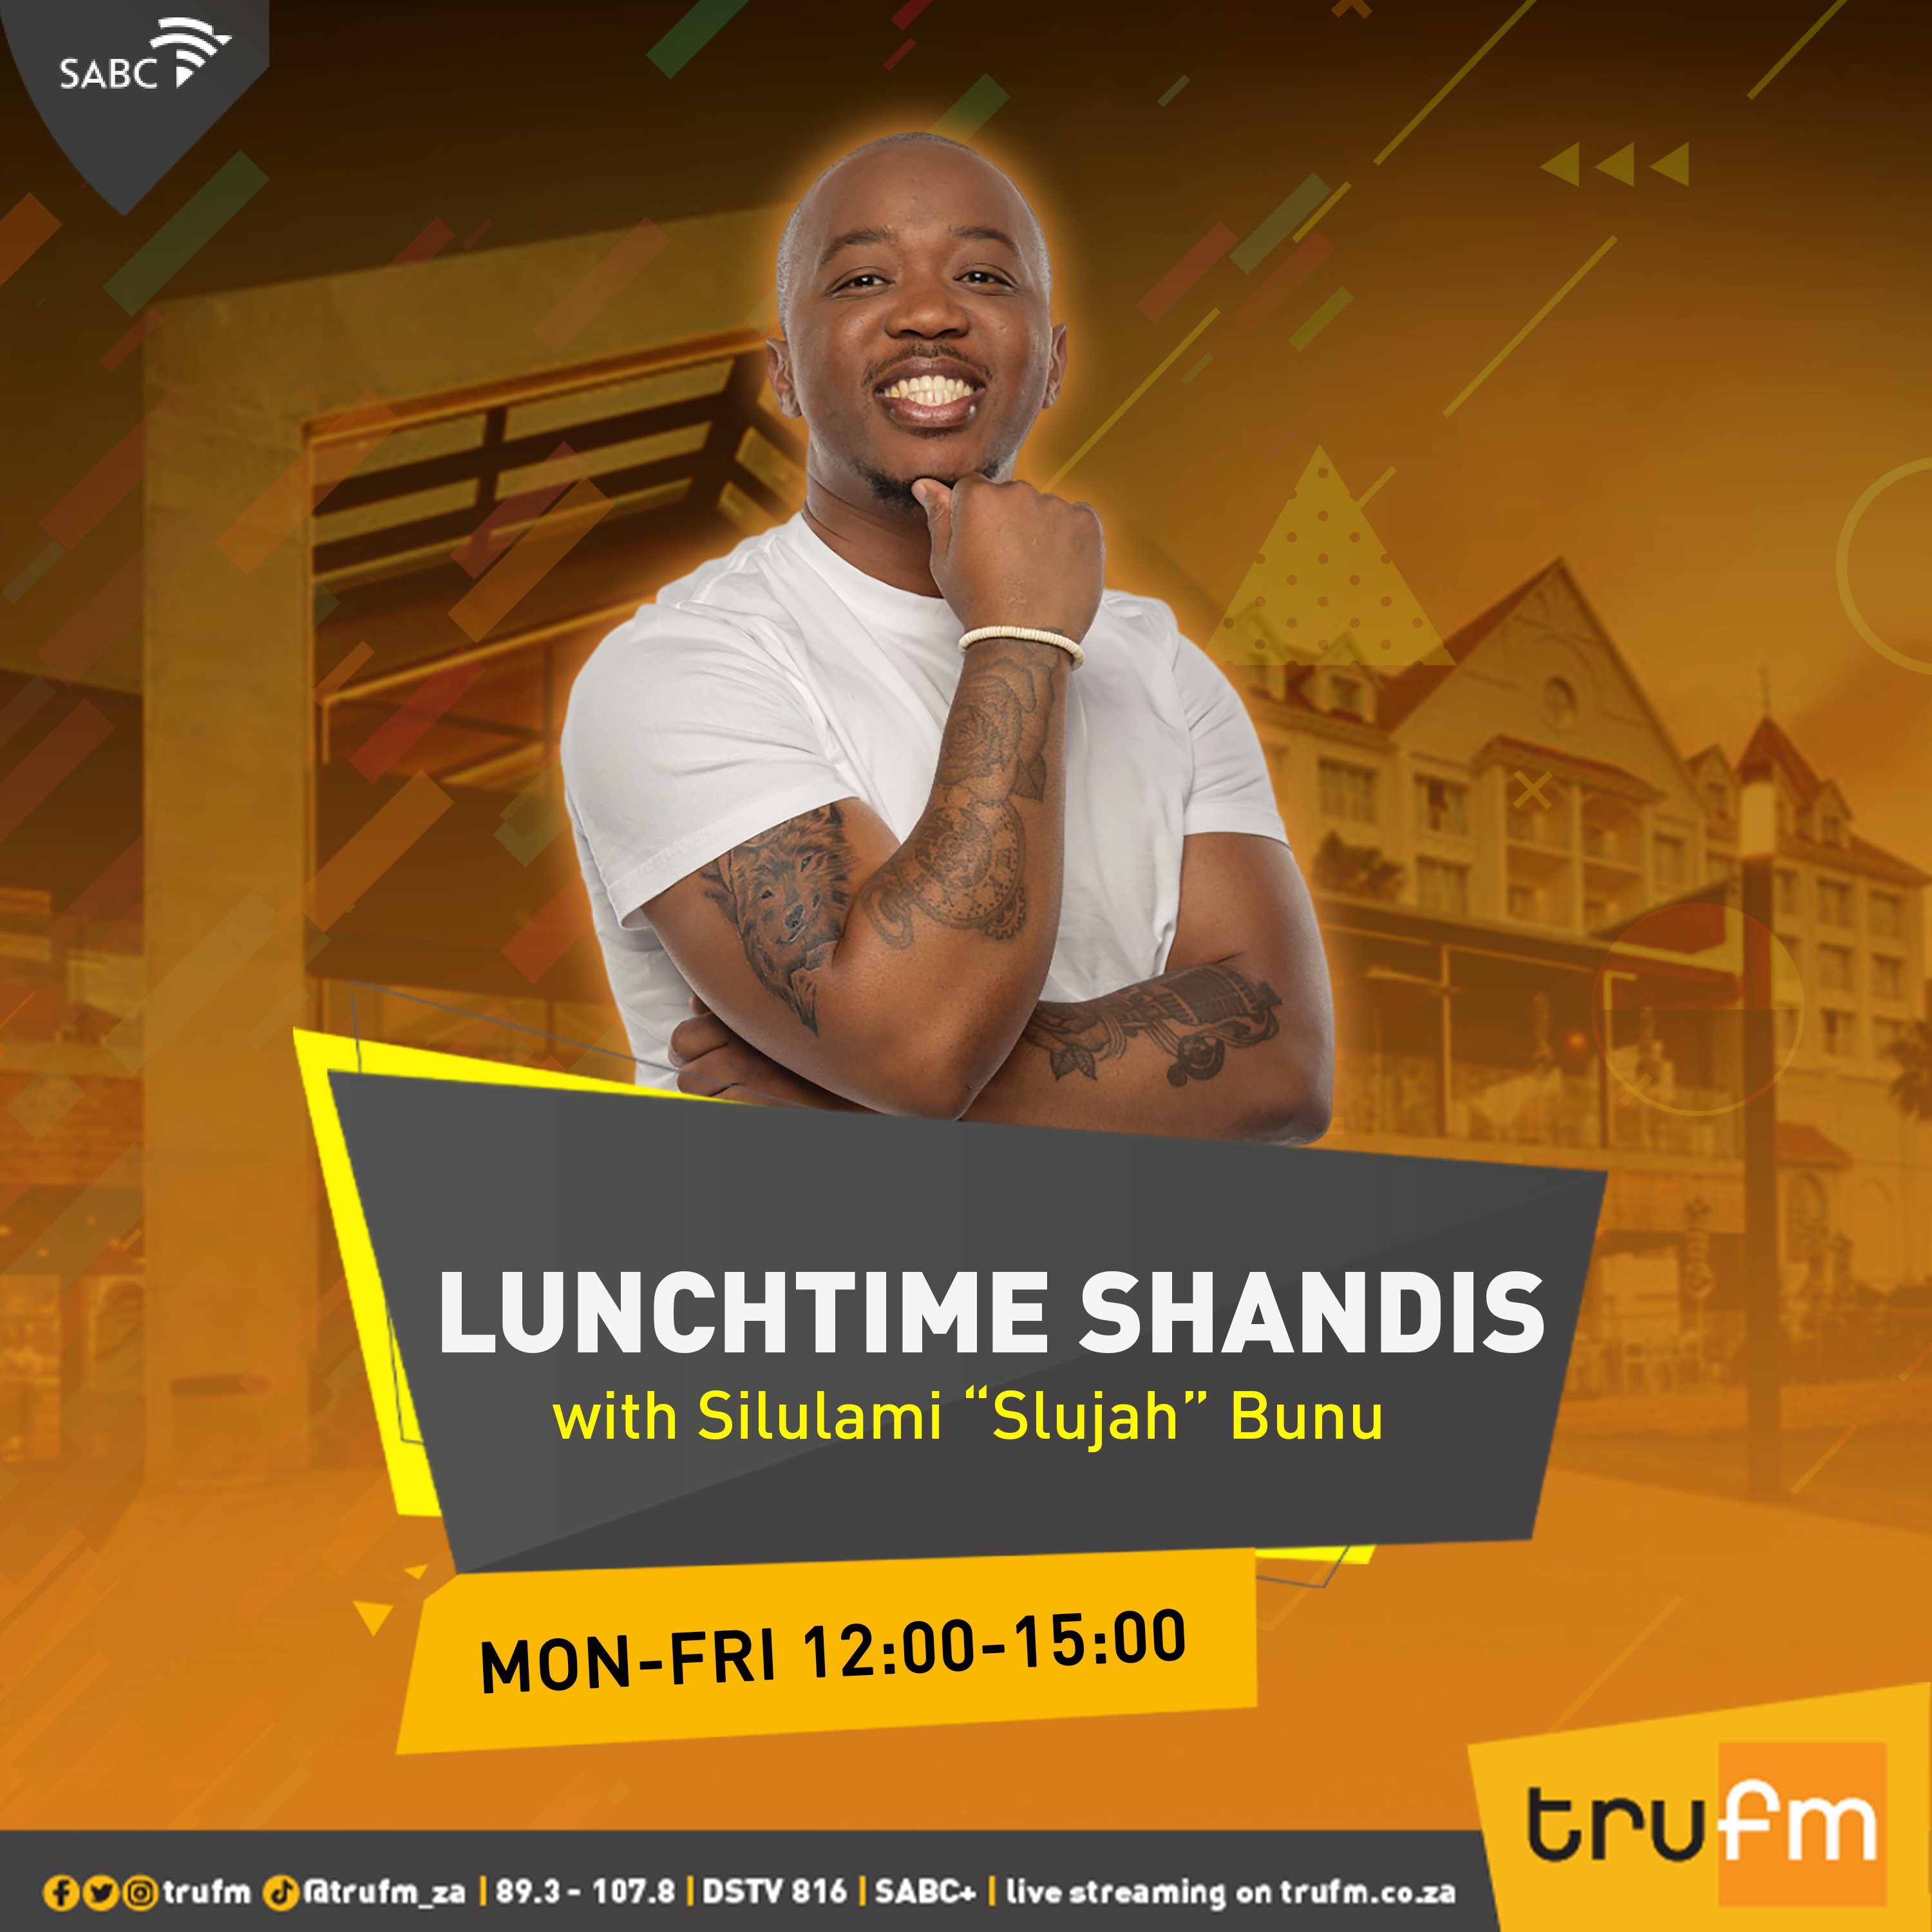 LunchTime Shandis